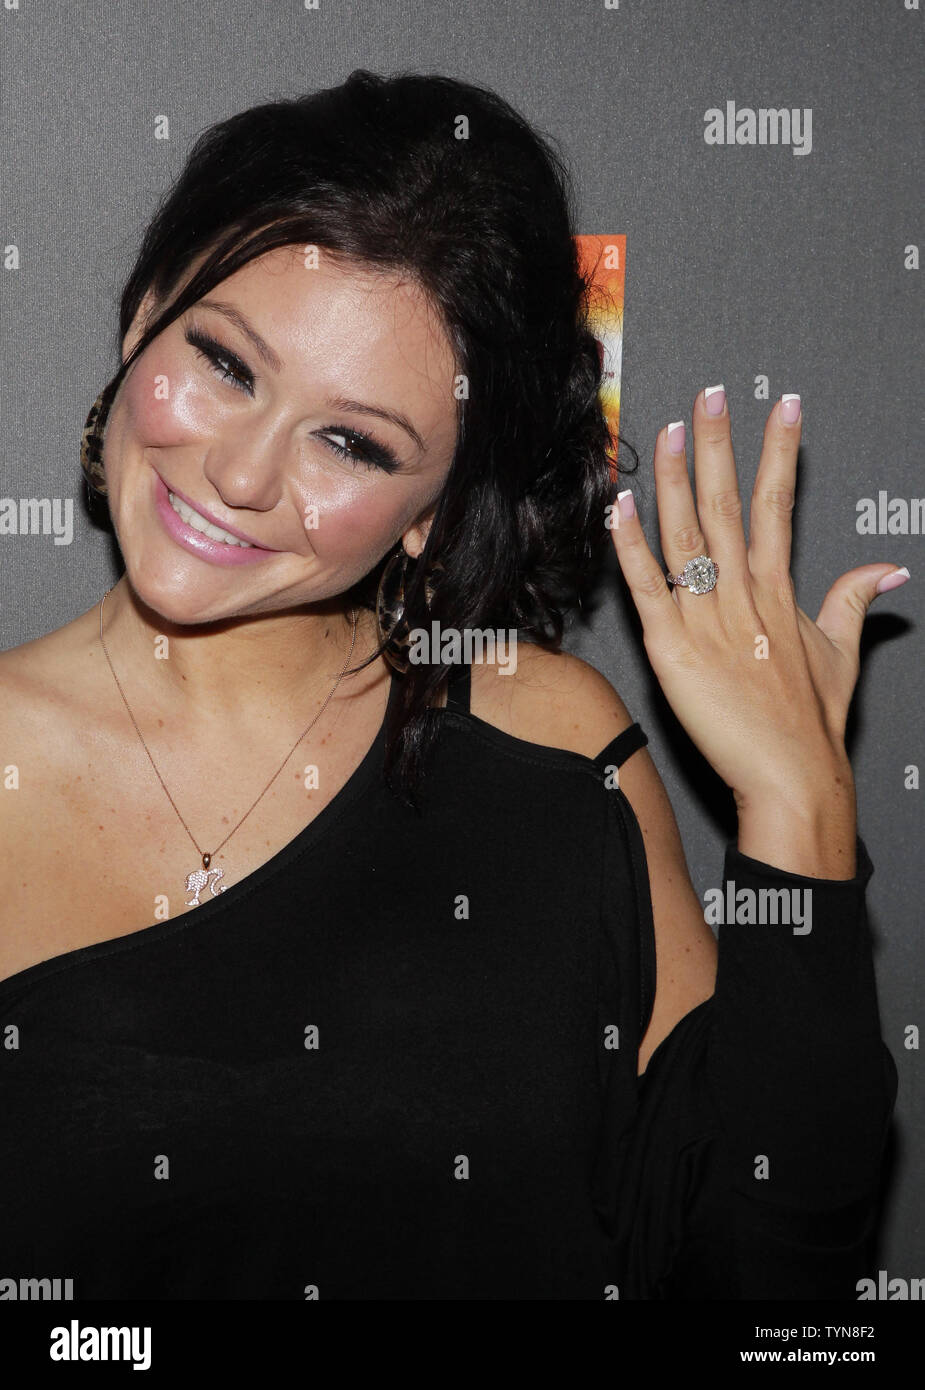 Jenni 'J Woww' Farley arrives on the red carpet for the 'Jersey Shore' Final Season Premiere at Bagatelle in New York City on October 4, 2012.       UPI/John Angelillo Stock Photo